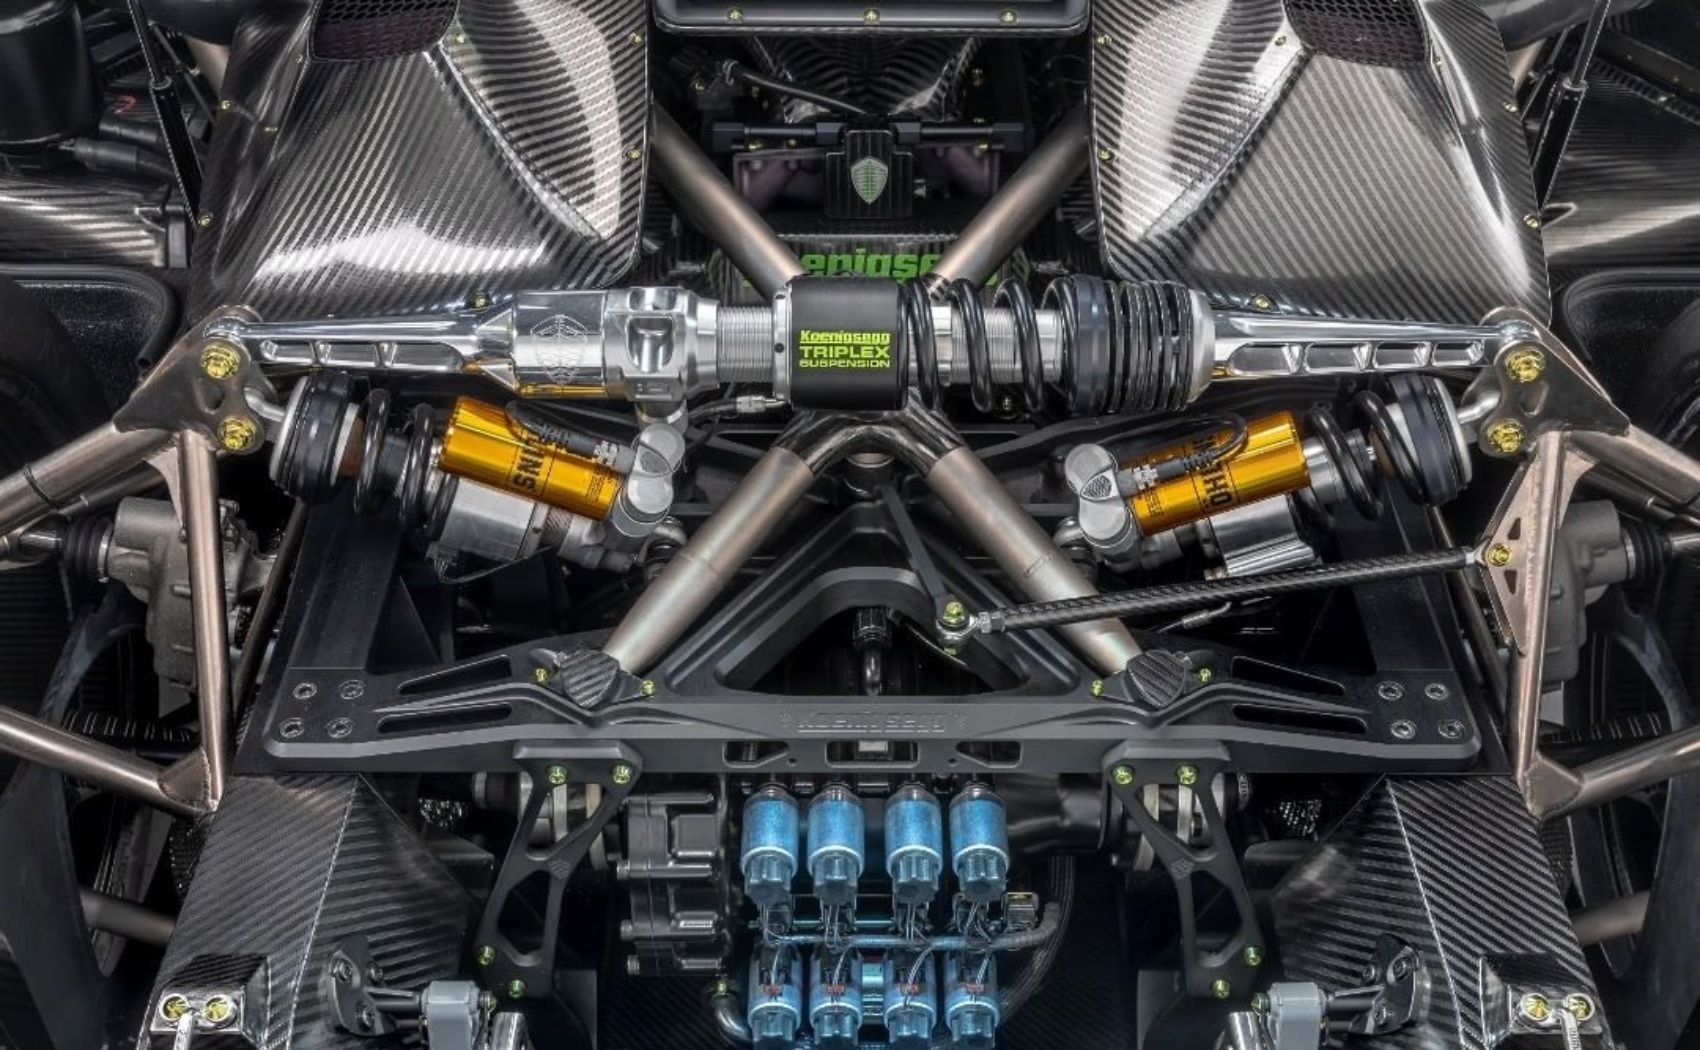 koenigsegg-triplex-arguably-the-most-innovative-suspension-design-out-there-166587_1.jpg